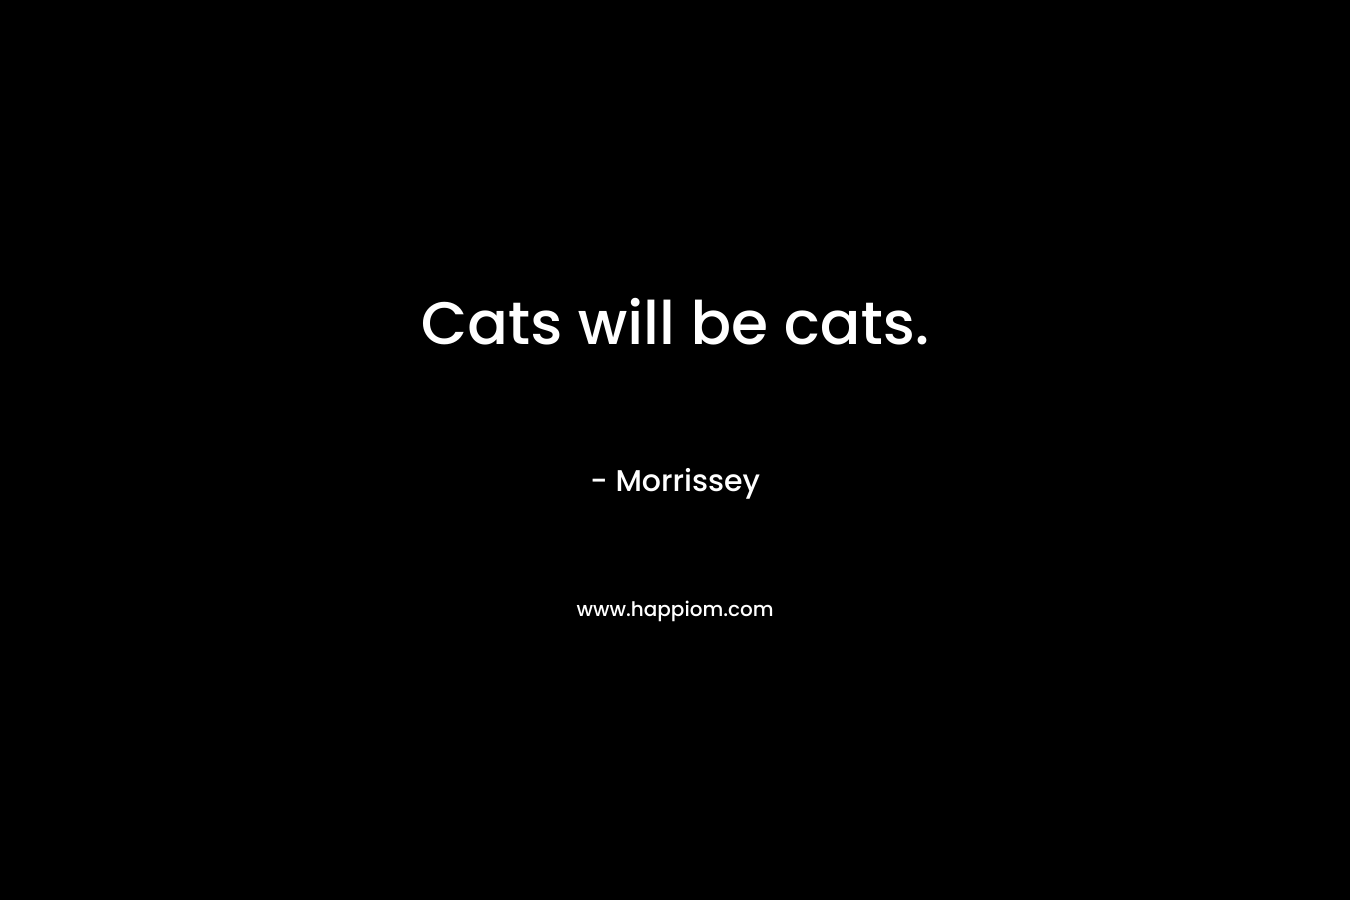 Cats will be cats.